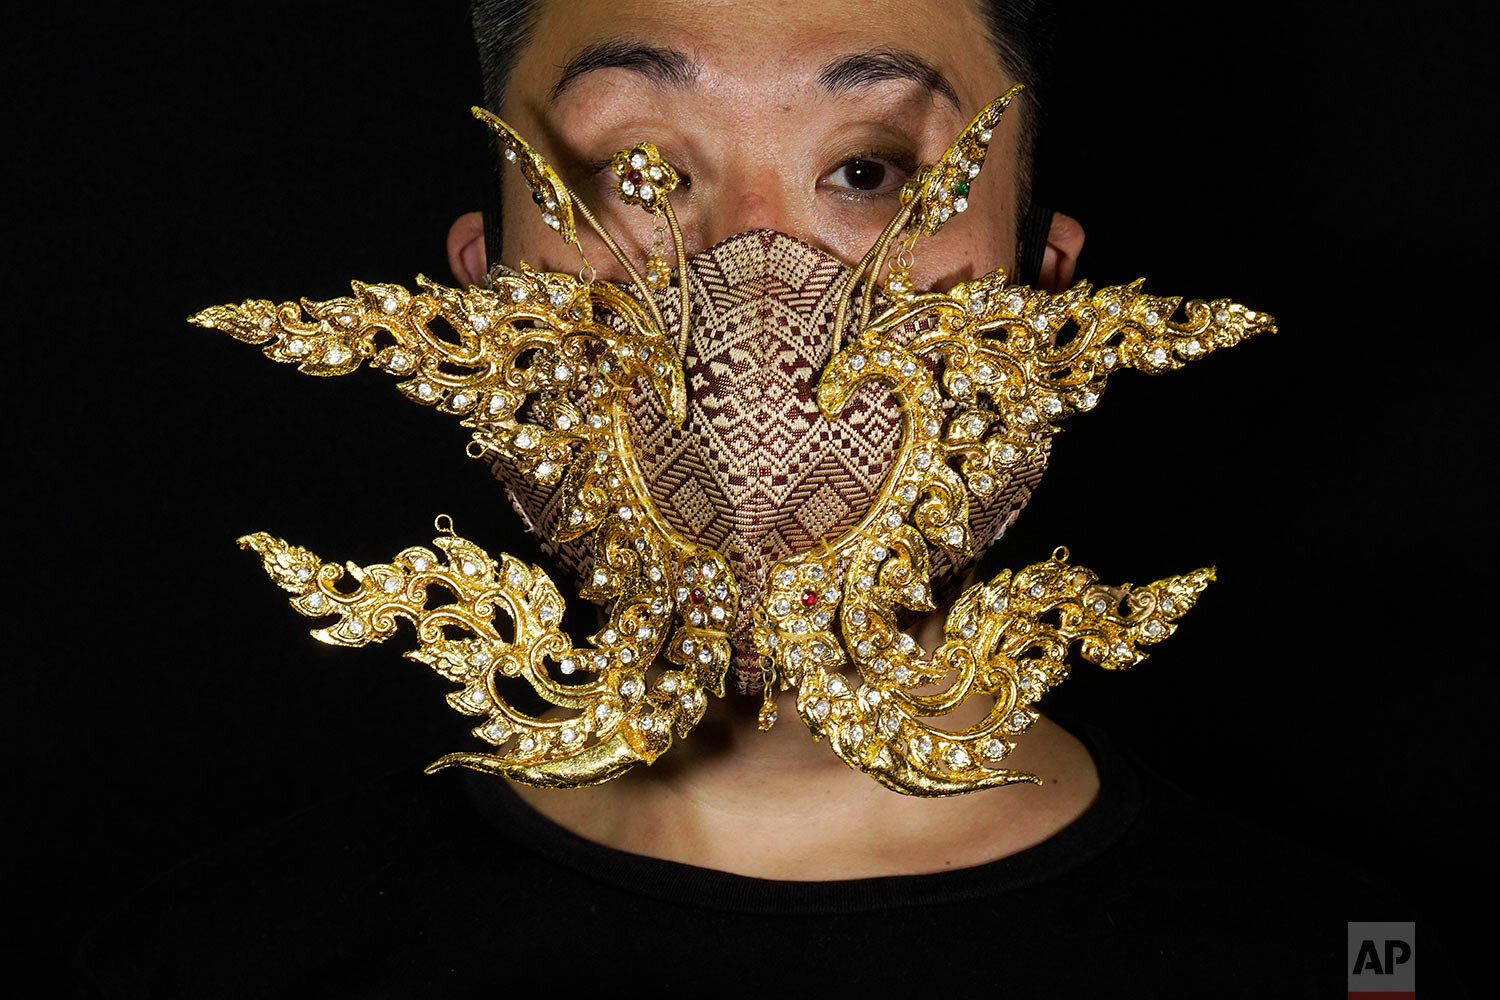  Edmond Kok, a Hong Kong theater costume designer and actor, wearing a face mask inspired by the decoration of Thai temple to Kok's face in Hong Kong Thursday, Aug. 6, 2020. (AP Photo/Vincent Yu) 